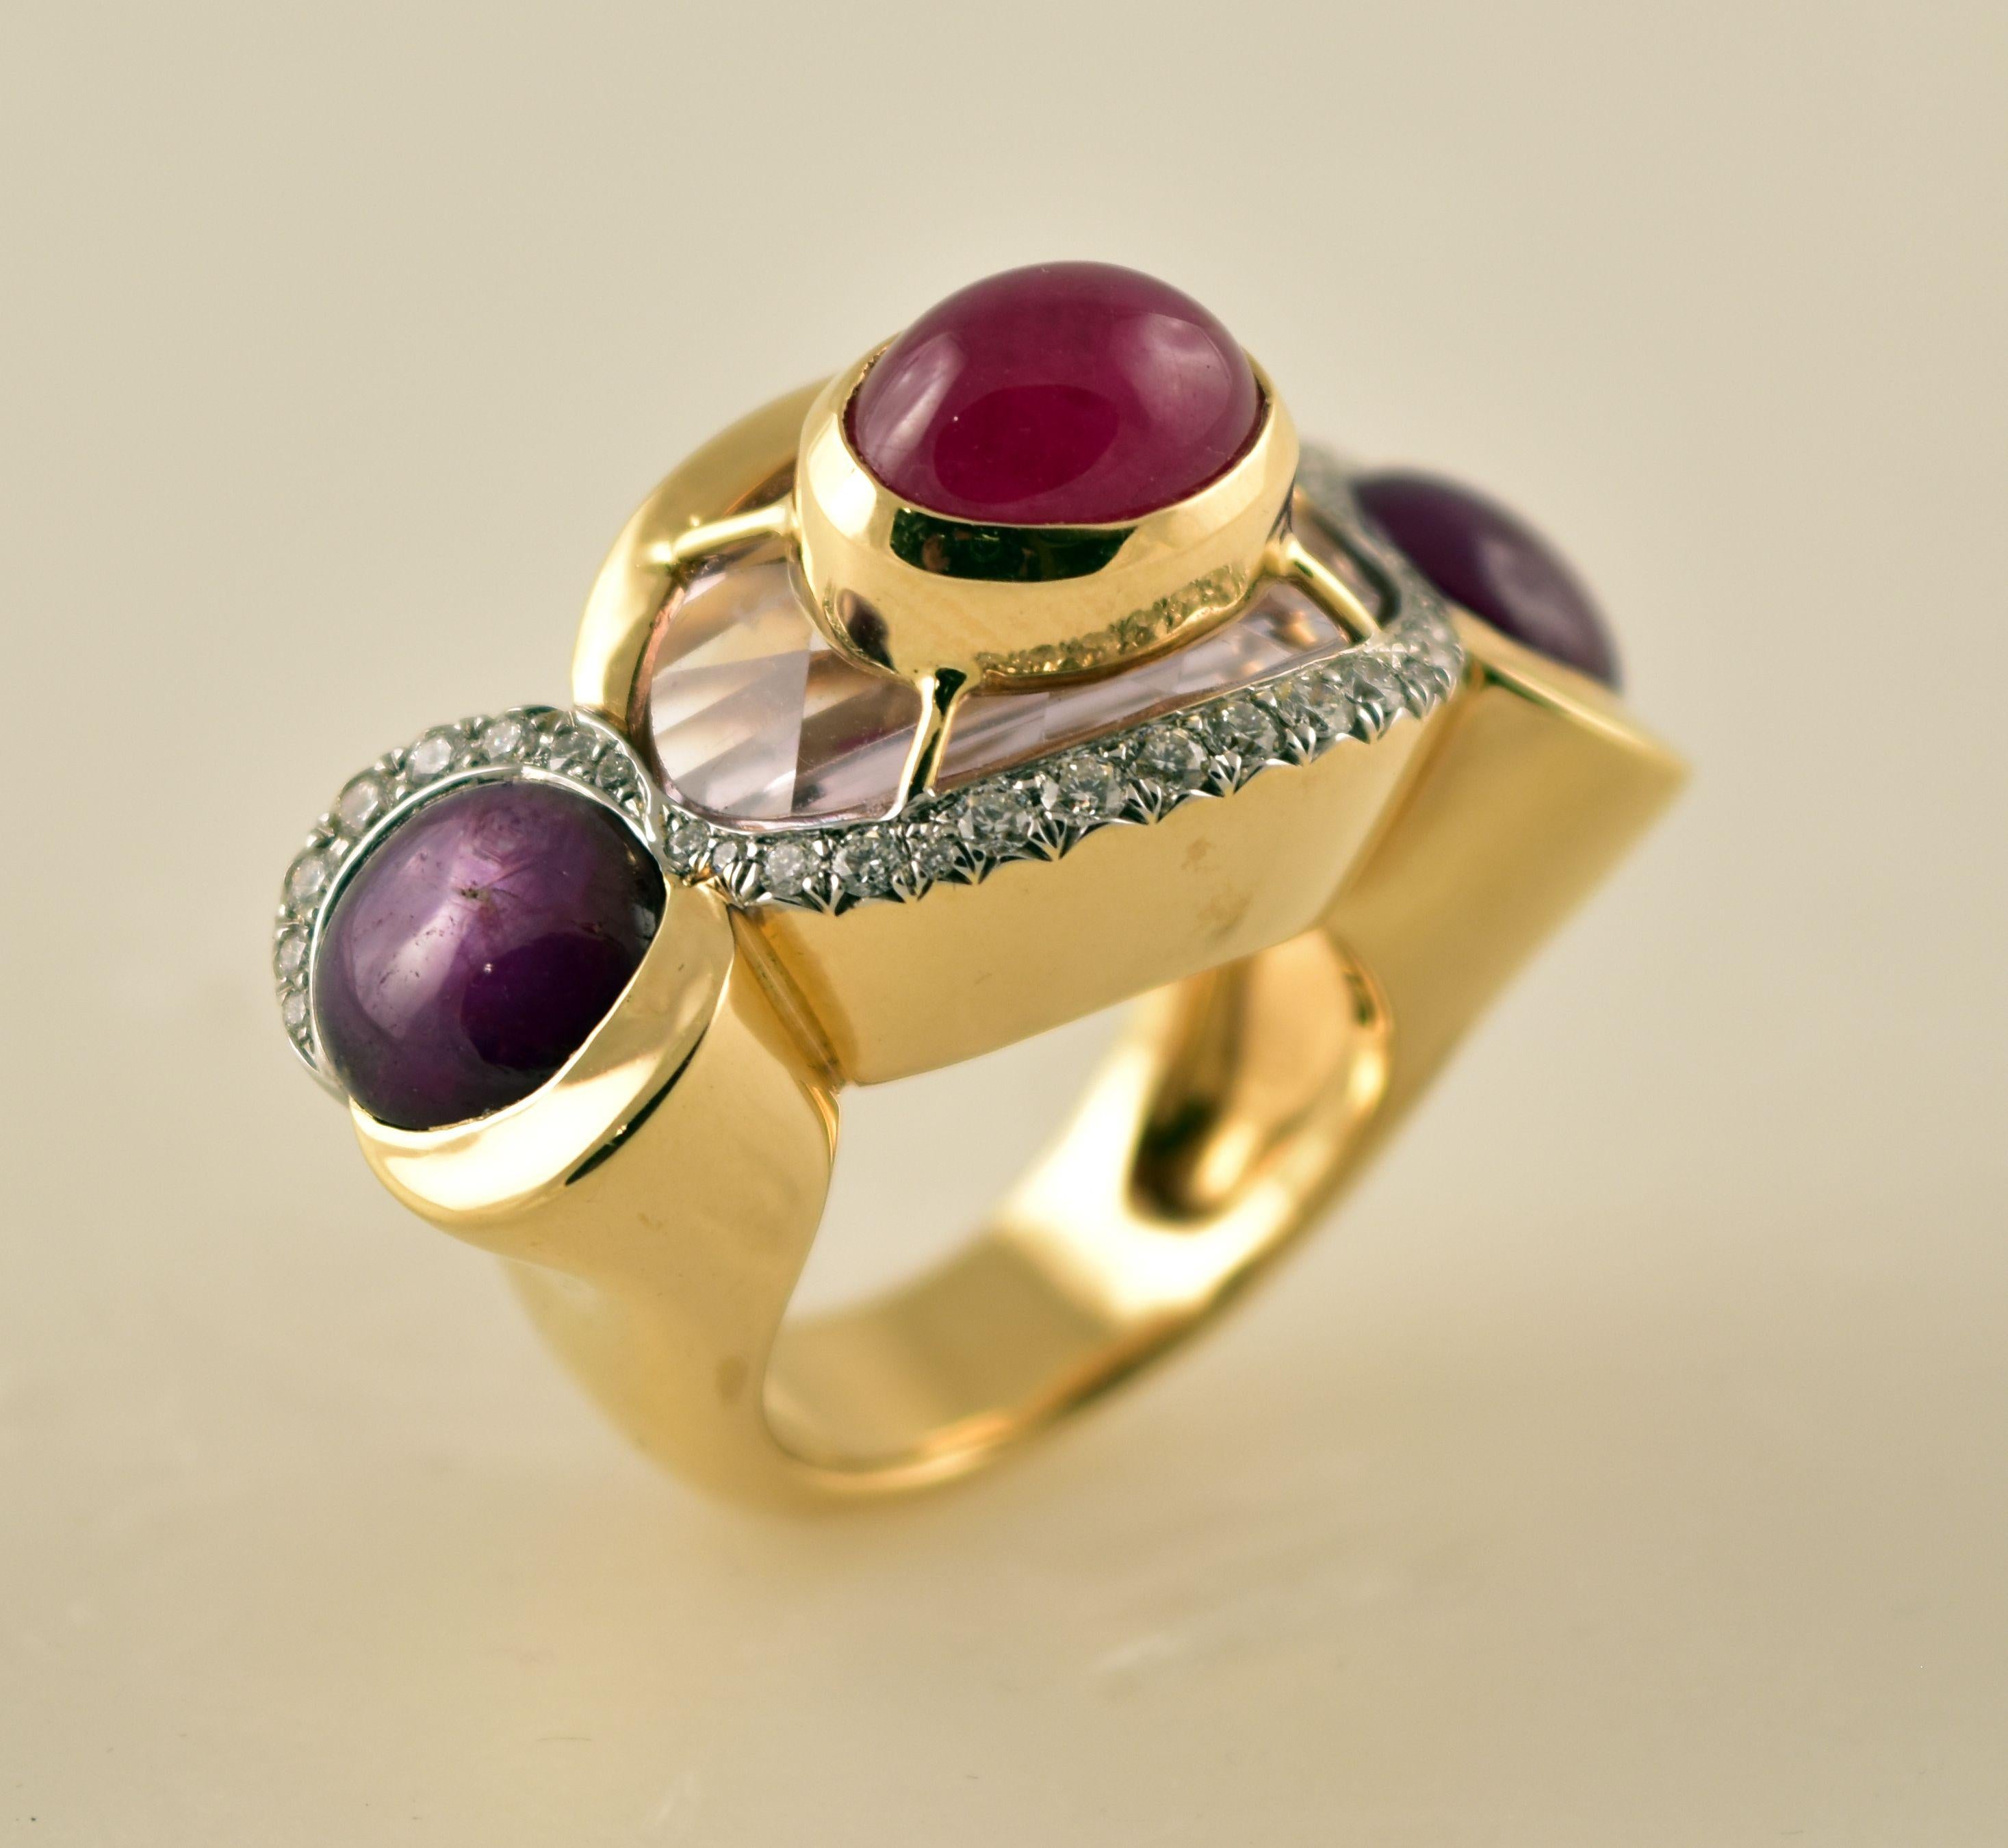 Stunning Pink Amethyst, Ruby, Star Ruby and Diamond Statement Ring, hand crafted in 18k yellow Gold by Tony Duquette, Designer Extraordinaire! Pink Amethyst (app. 8 carat); Ruby (app. 6 carat) and Star Ruby (app. 8.60 carat) and Diamond (app. 0.59